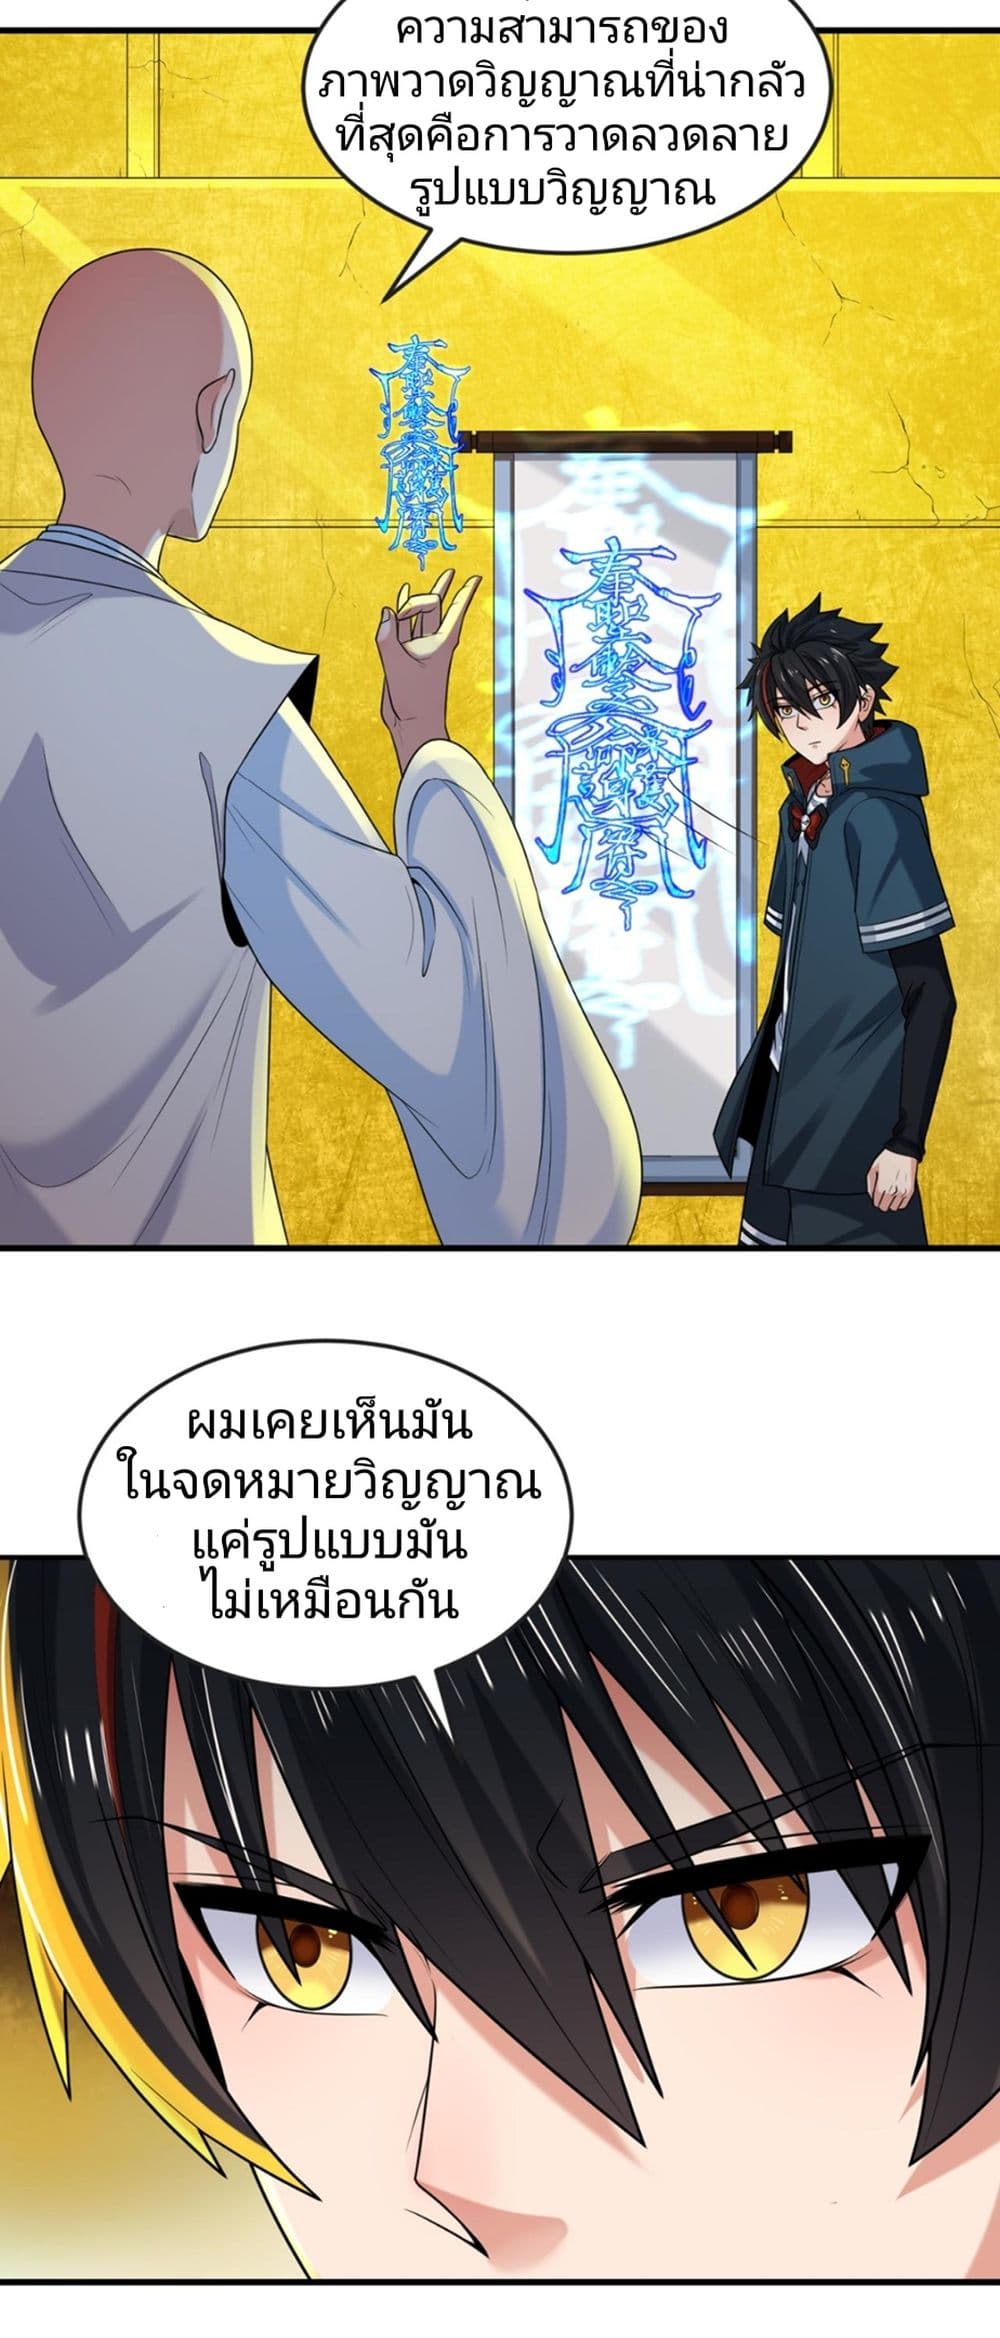 The Age of Ghost Spirits à¸à¸­à¸à¸à¸µà¹ 47 (8)